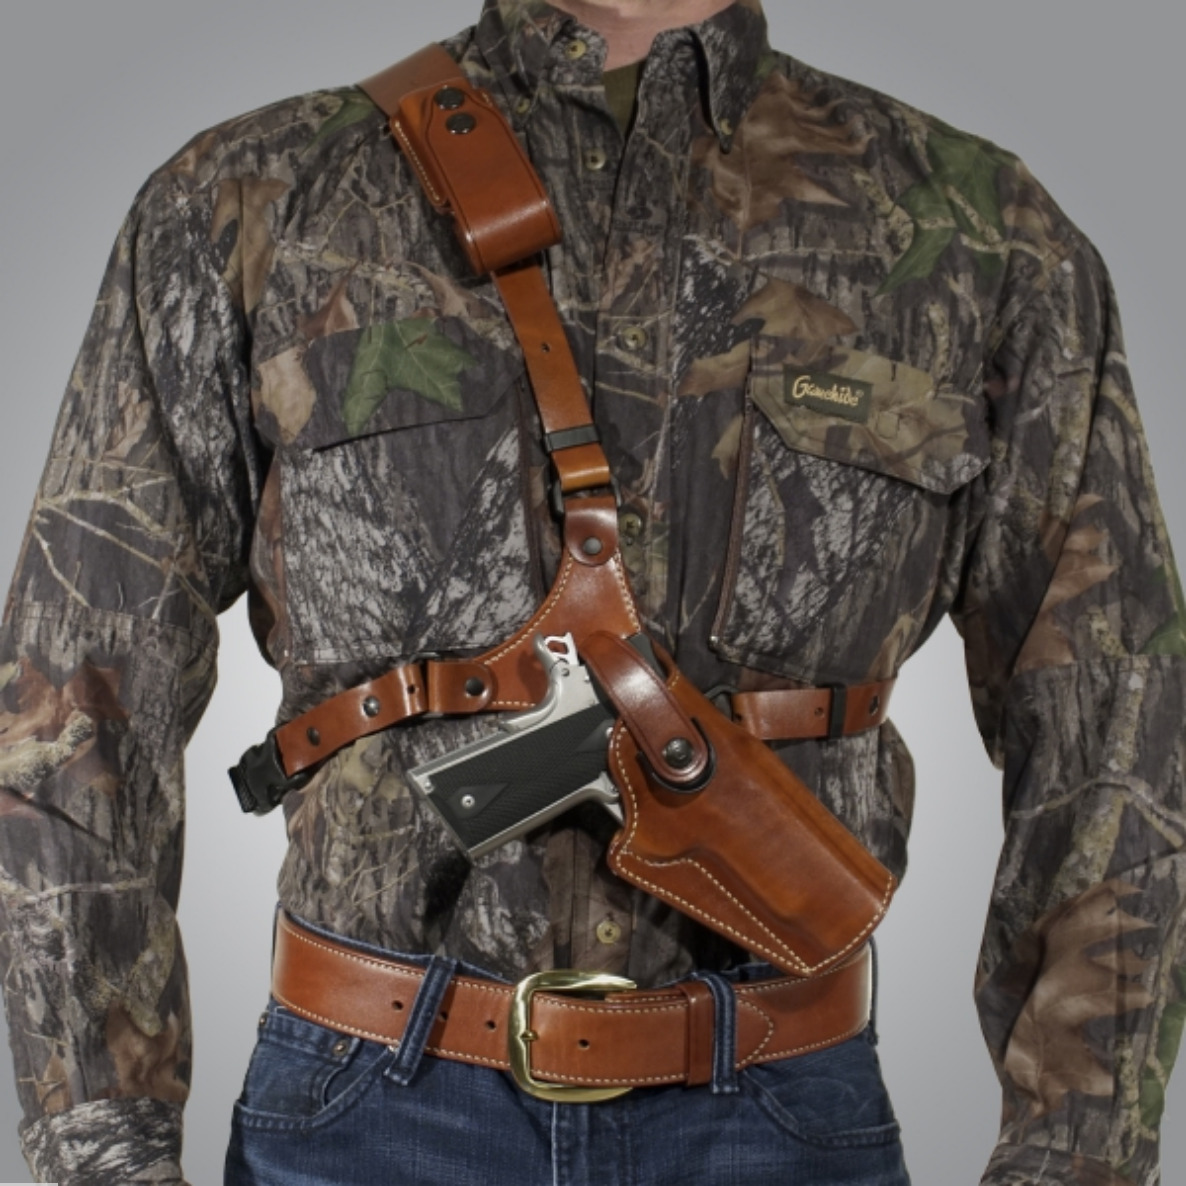 Galco Great Alaskan Holster | The Armory Life Forum